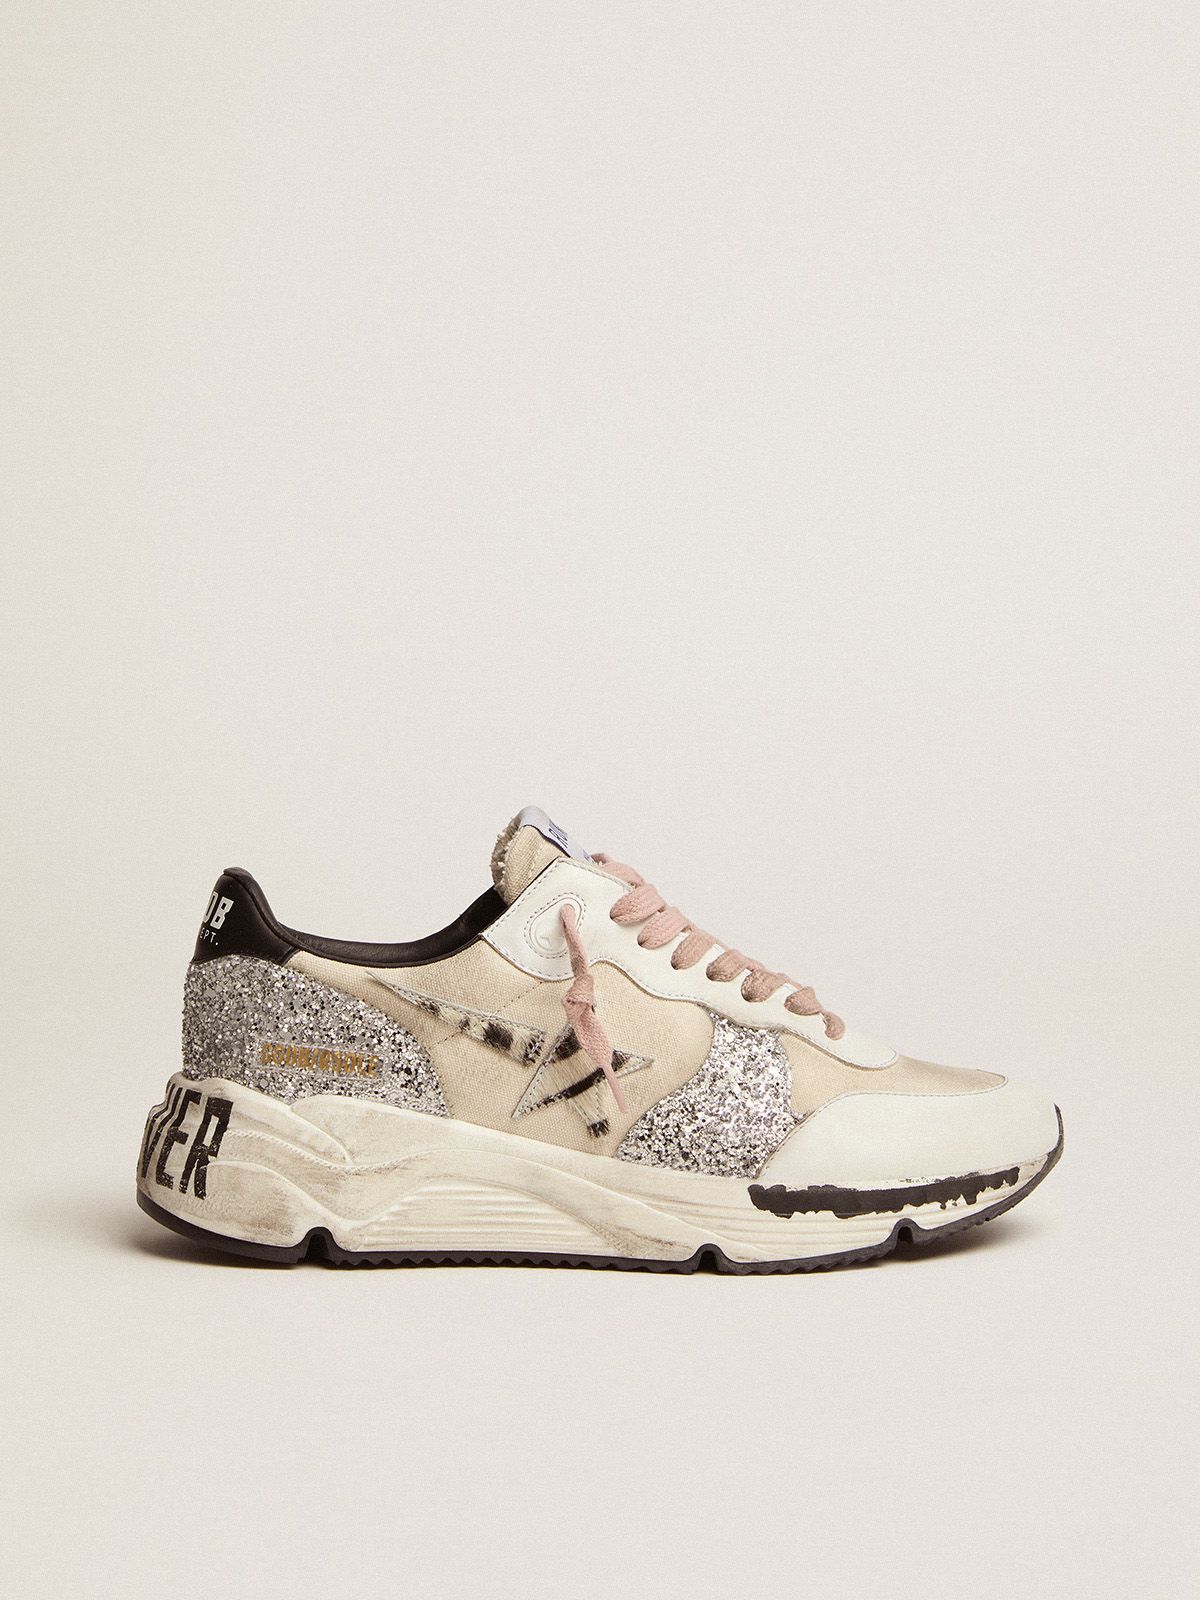 golden goose star canvas upper and Running sneakers Sole with cream skin pony zebra-print